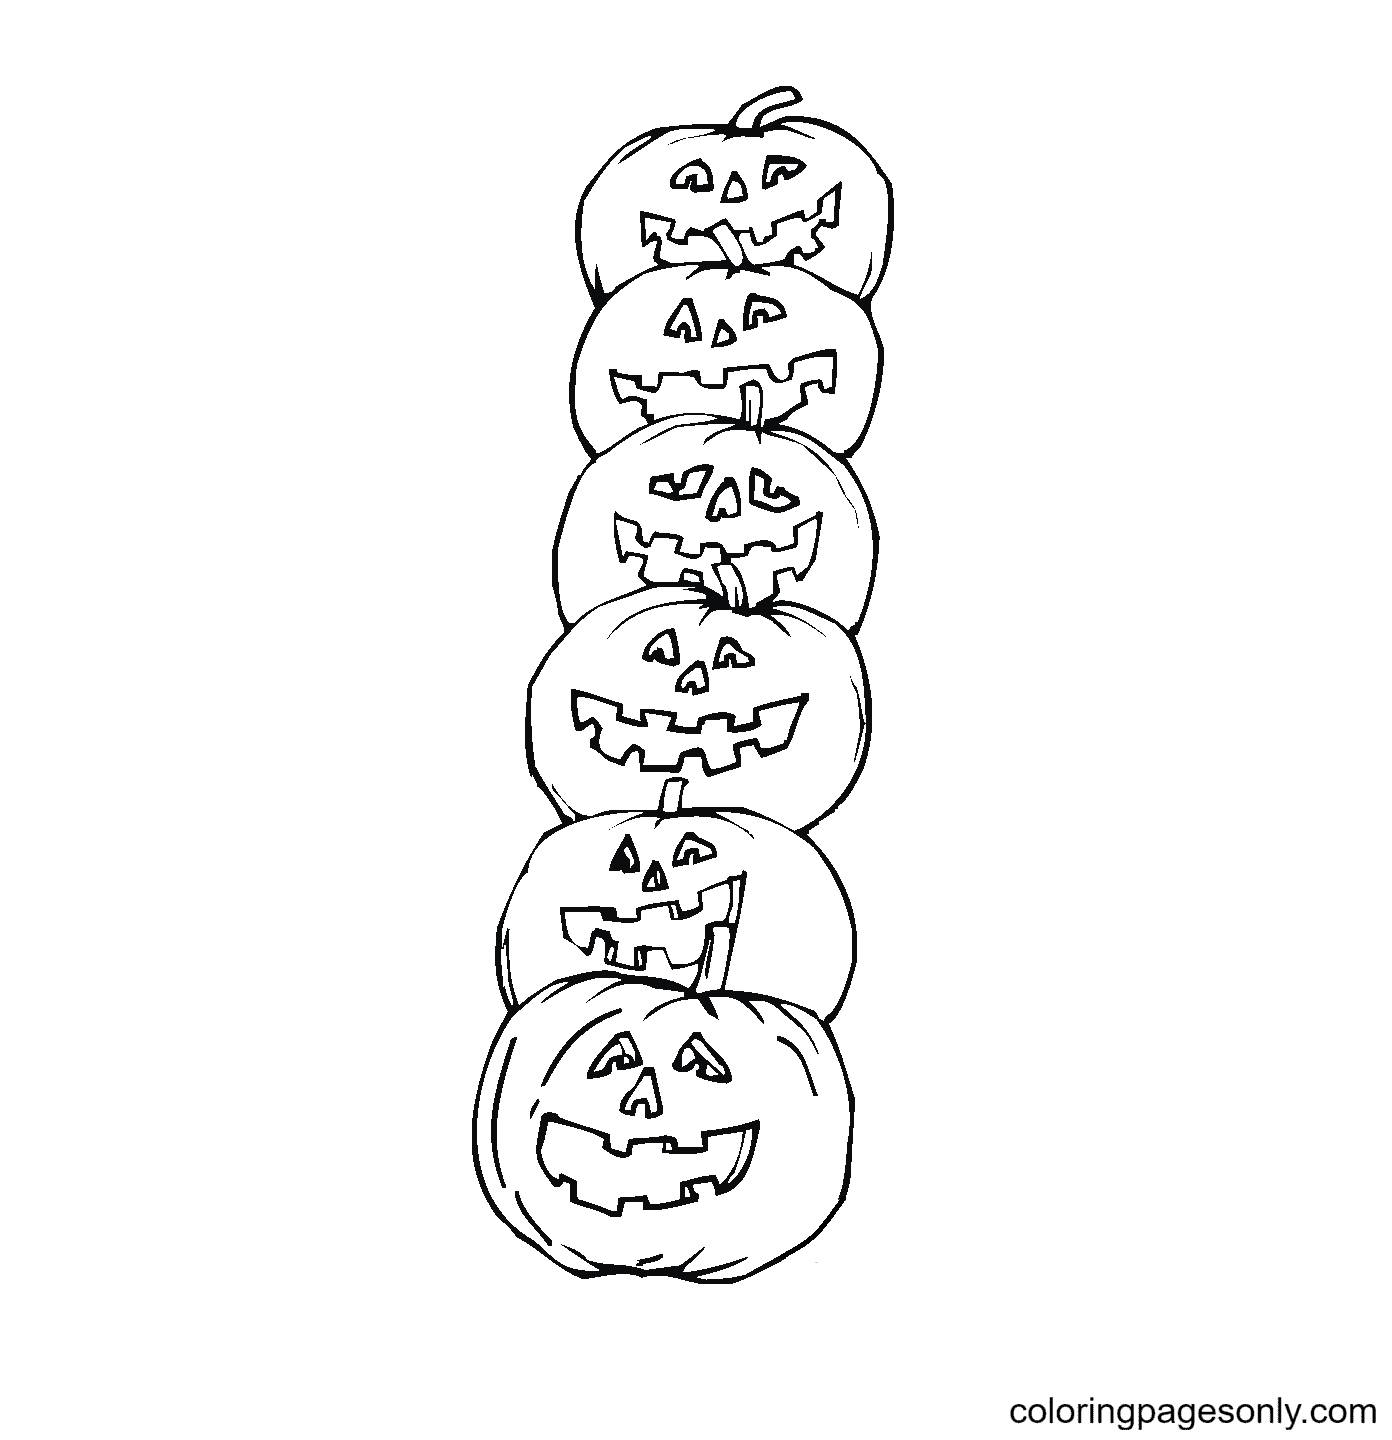 Six Funny Jack-o-lanterns Coloring Pages